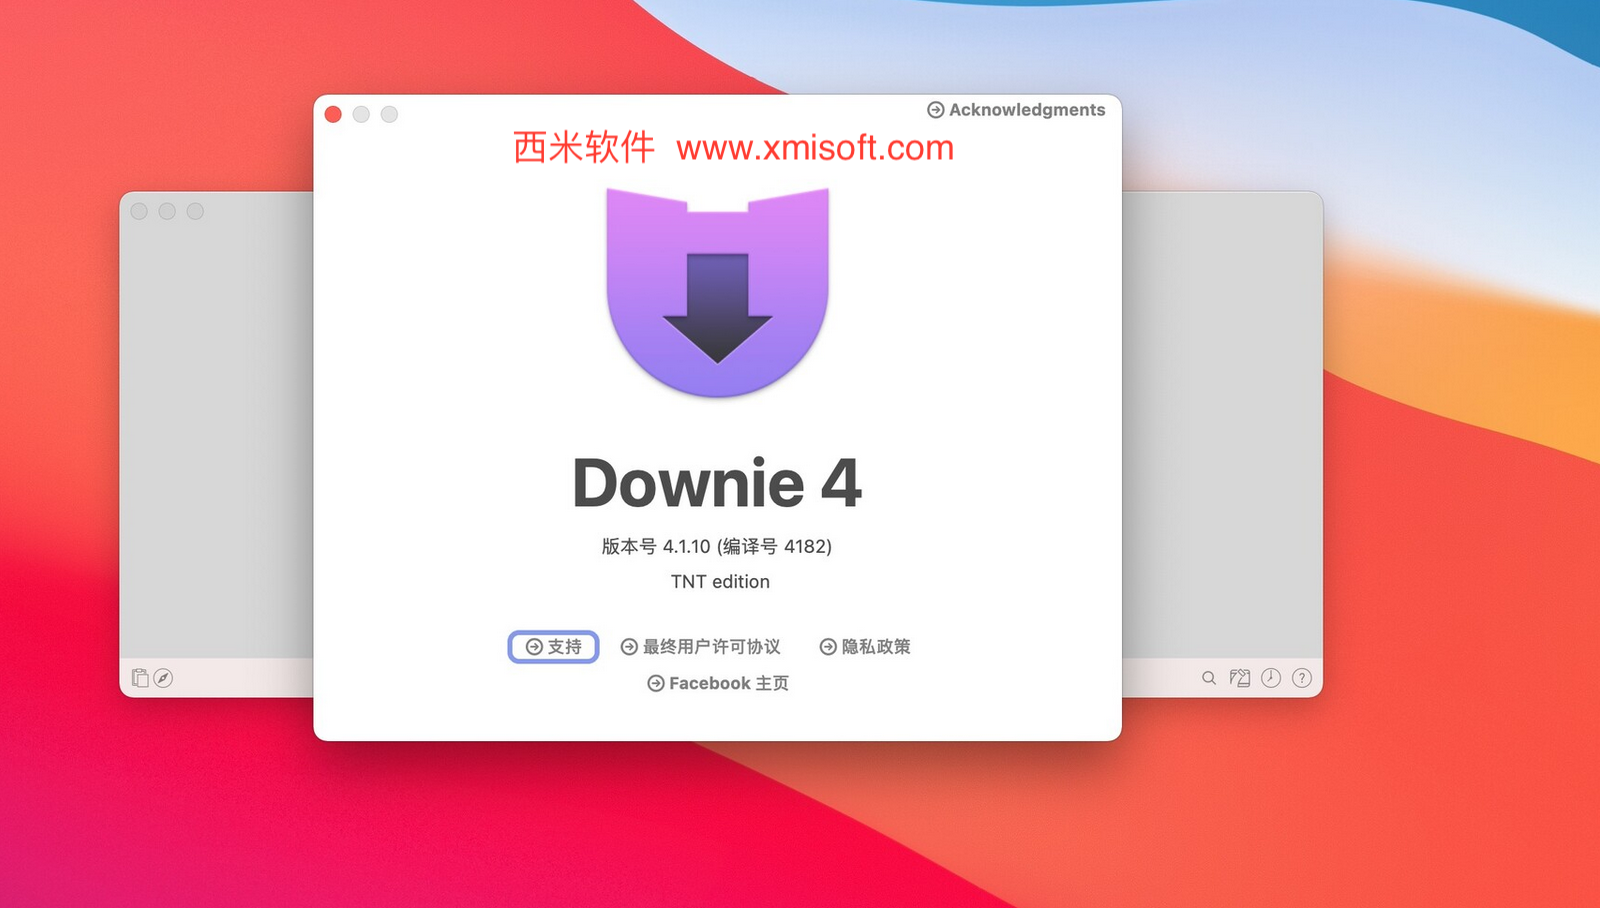 download the last version for mac Downie 4